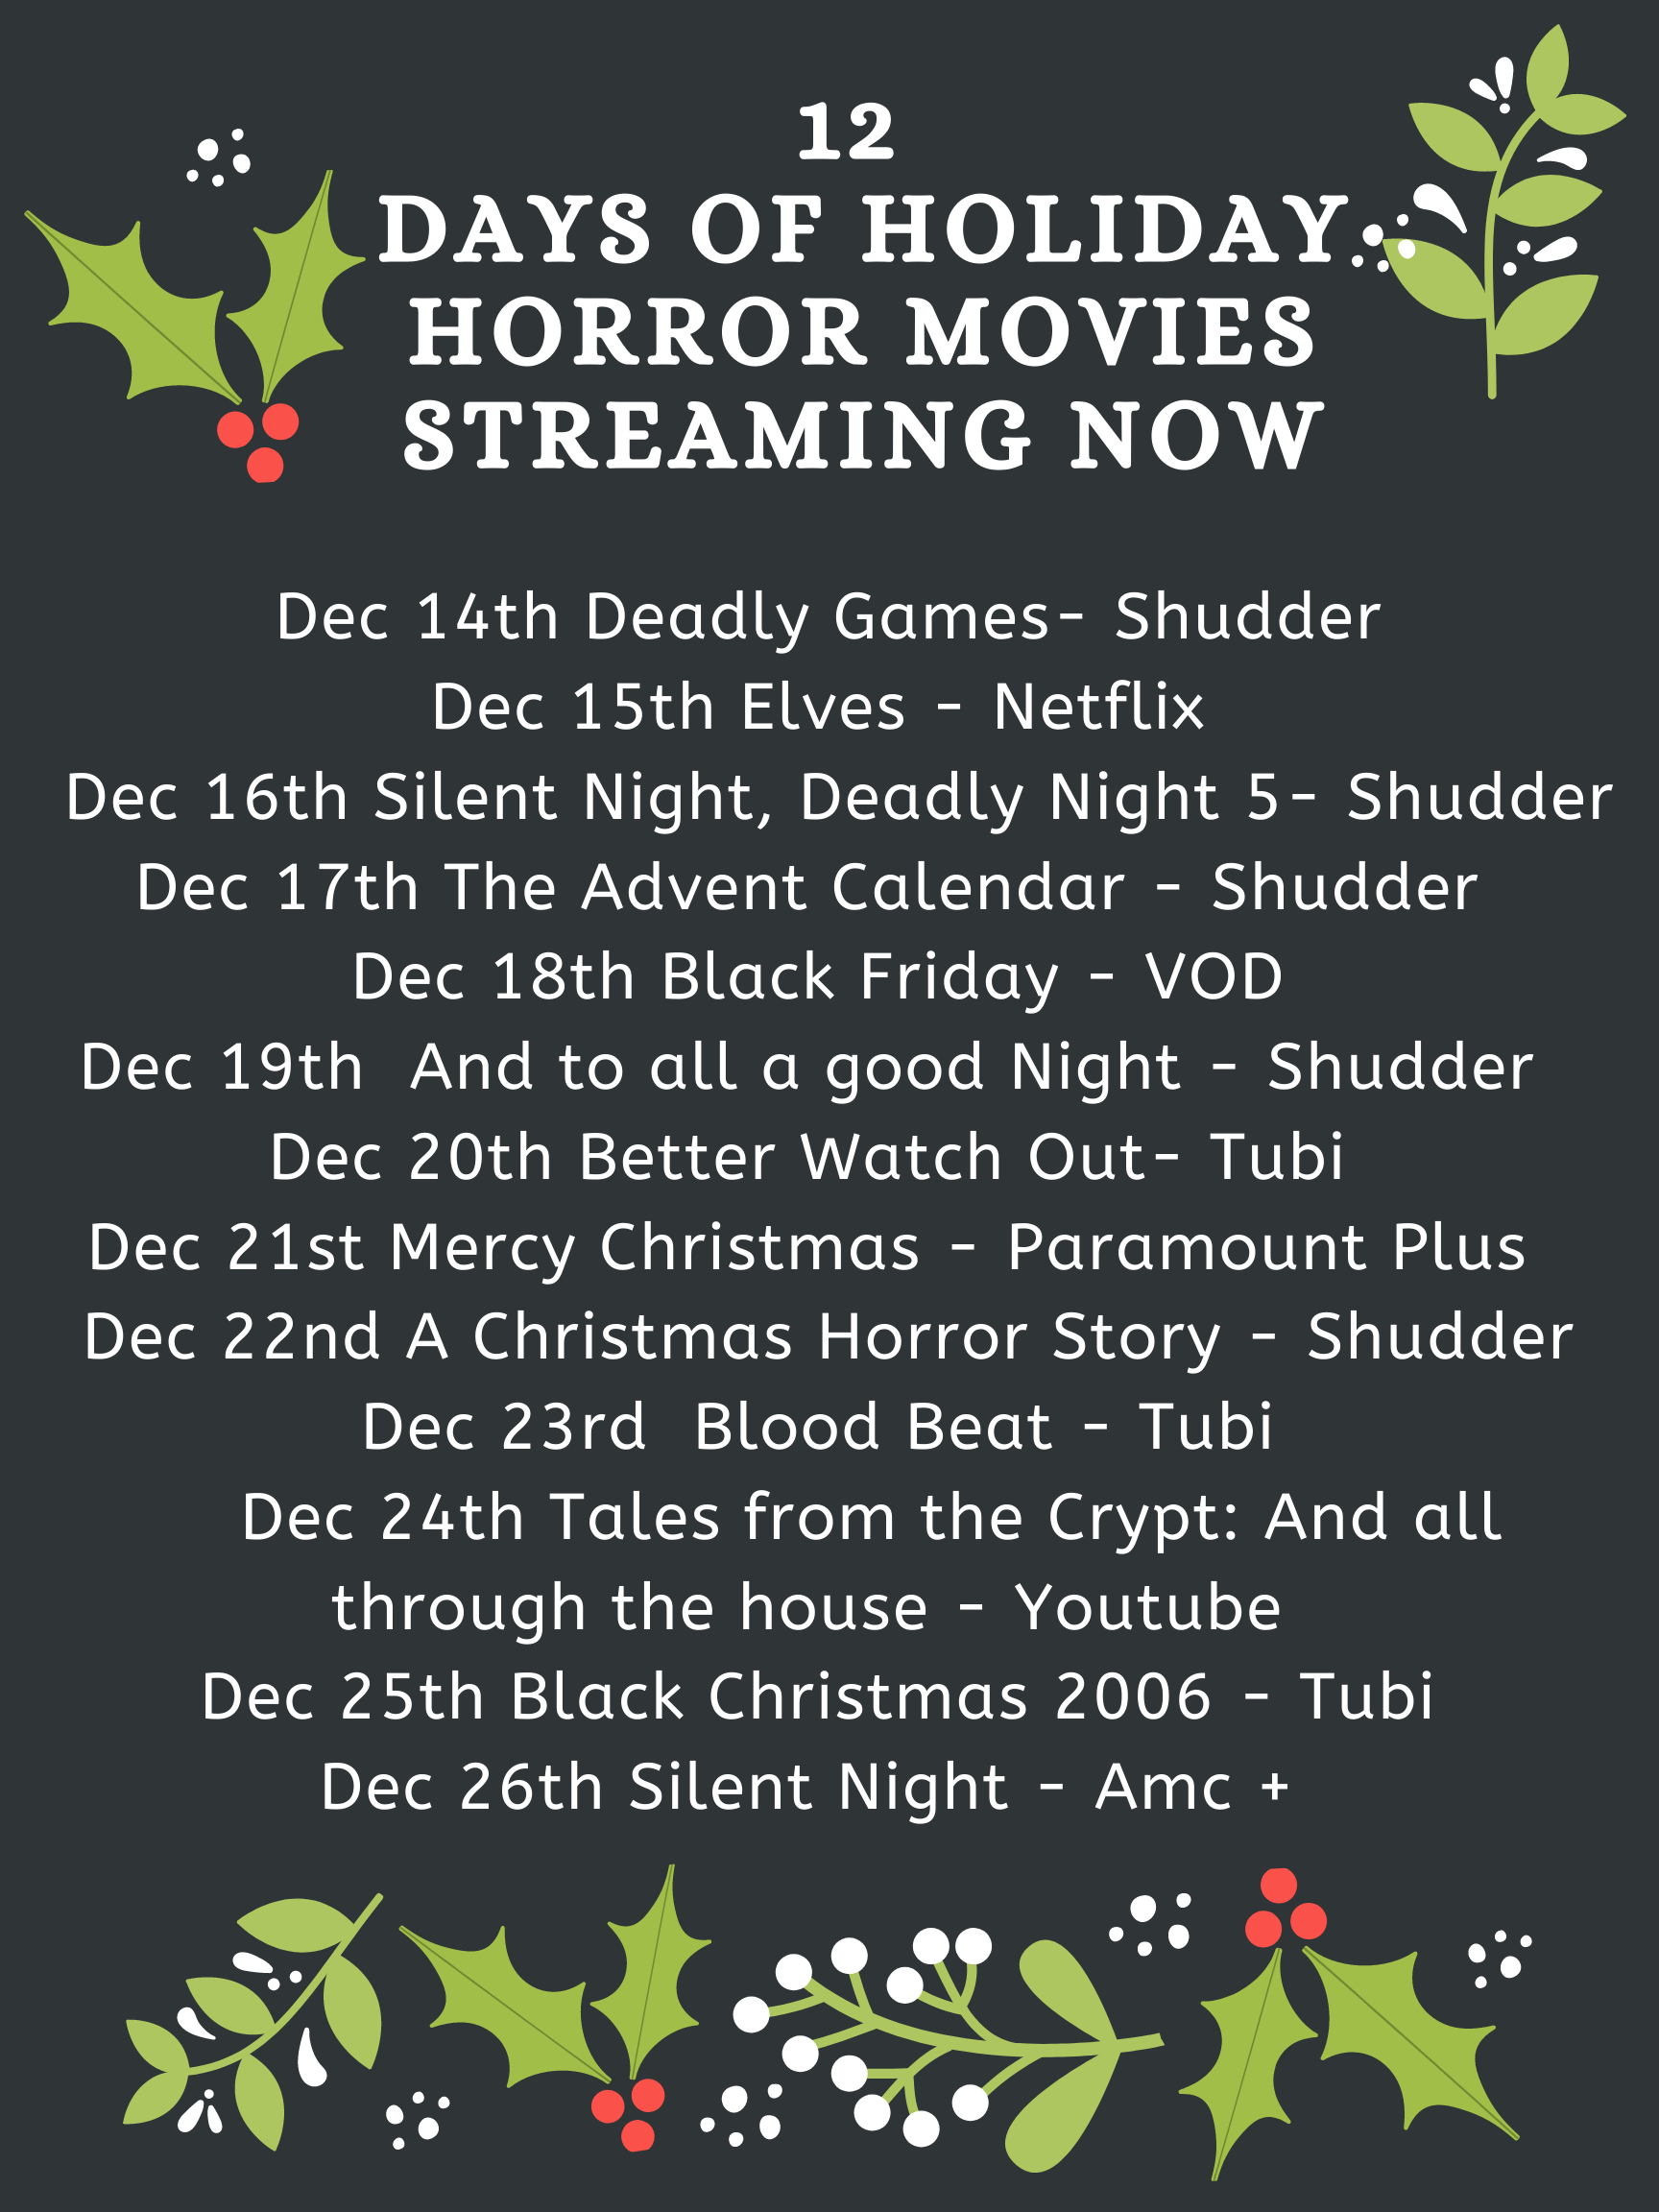 holiday horror movies streaming now 12 days of holiday horror movies